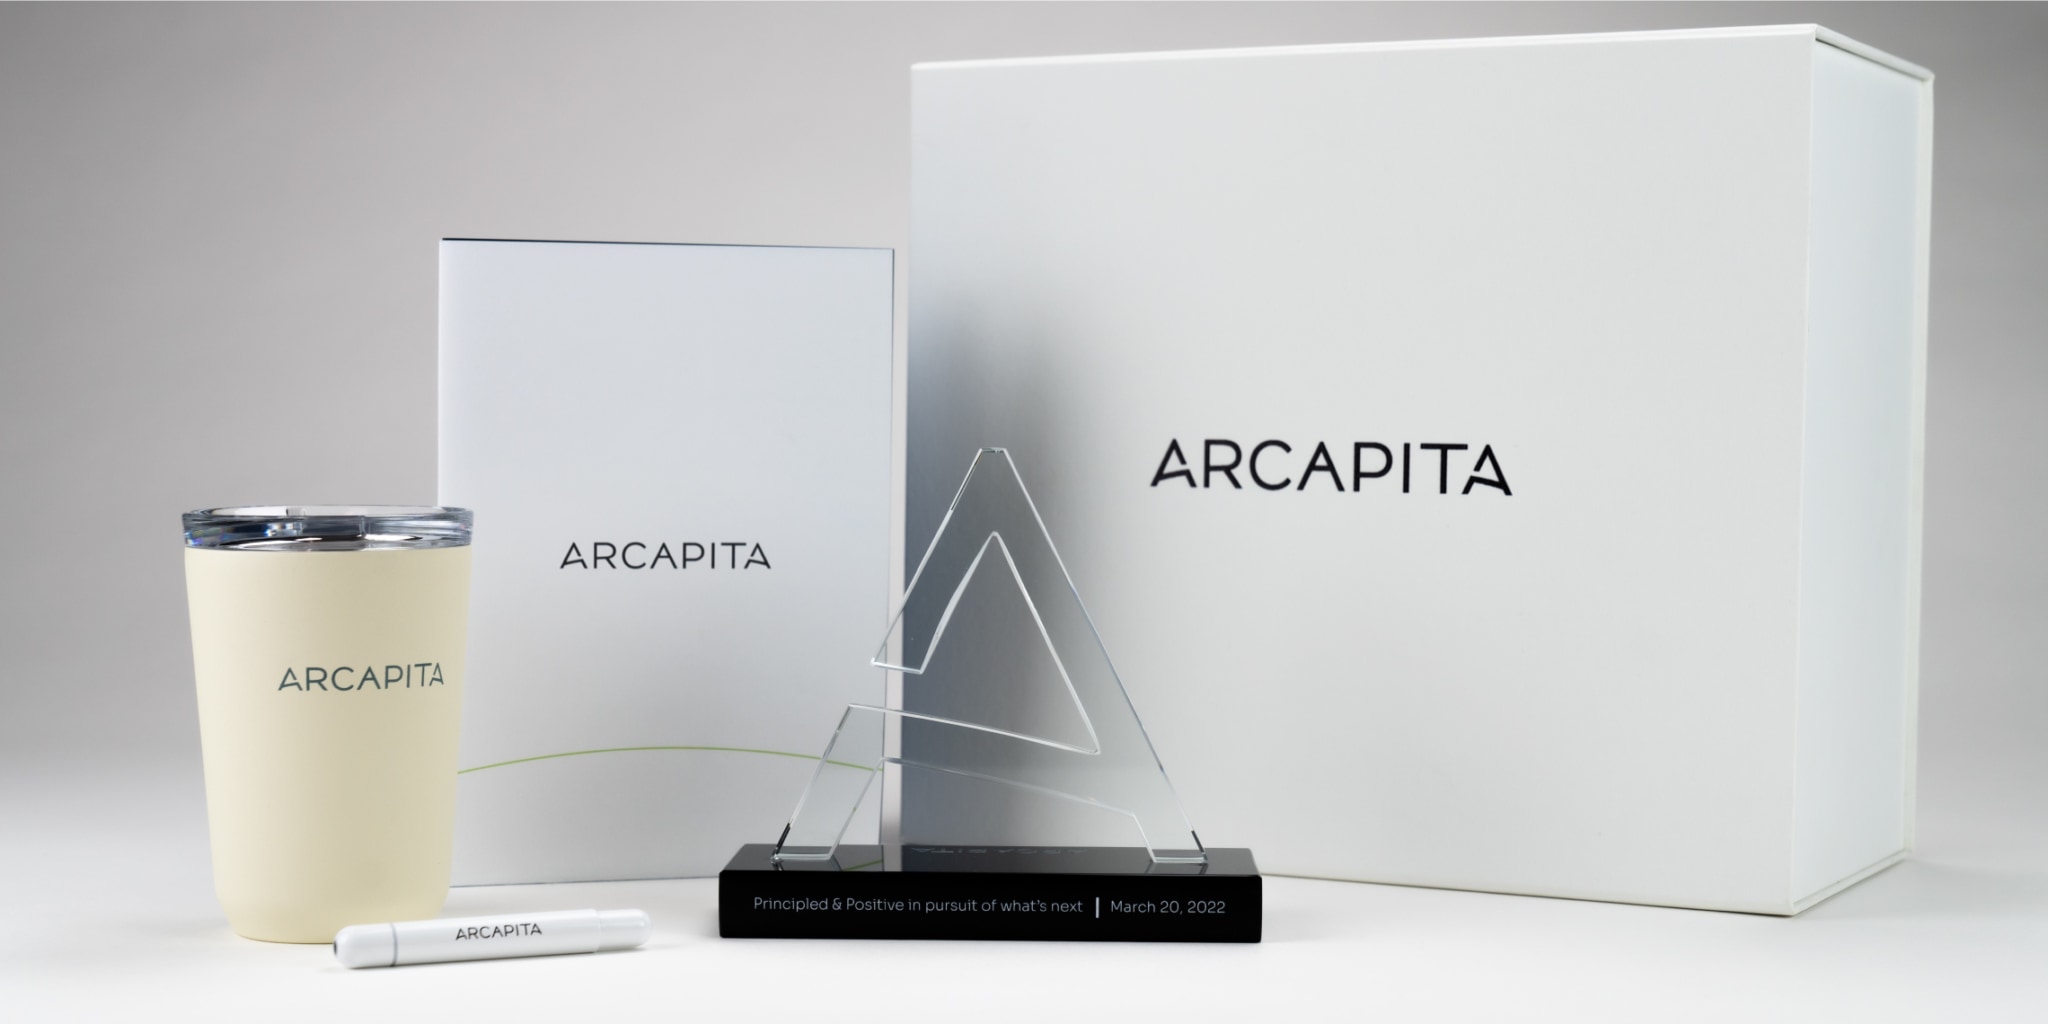 Employee kits to be used as an orientation gift, acknowledging their vital role in Arcapita’s transformation